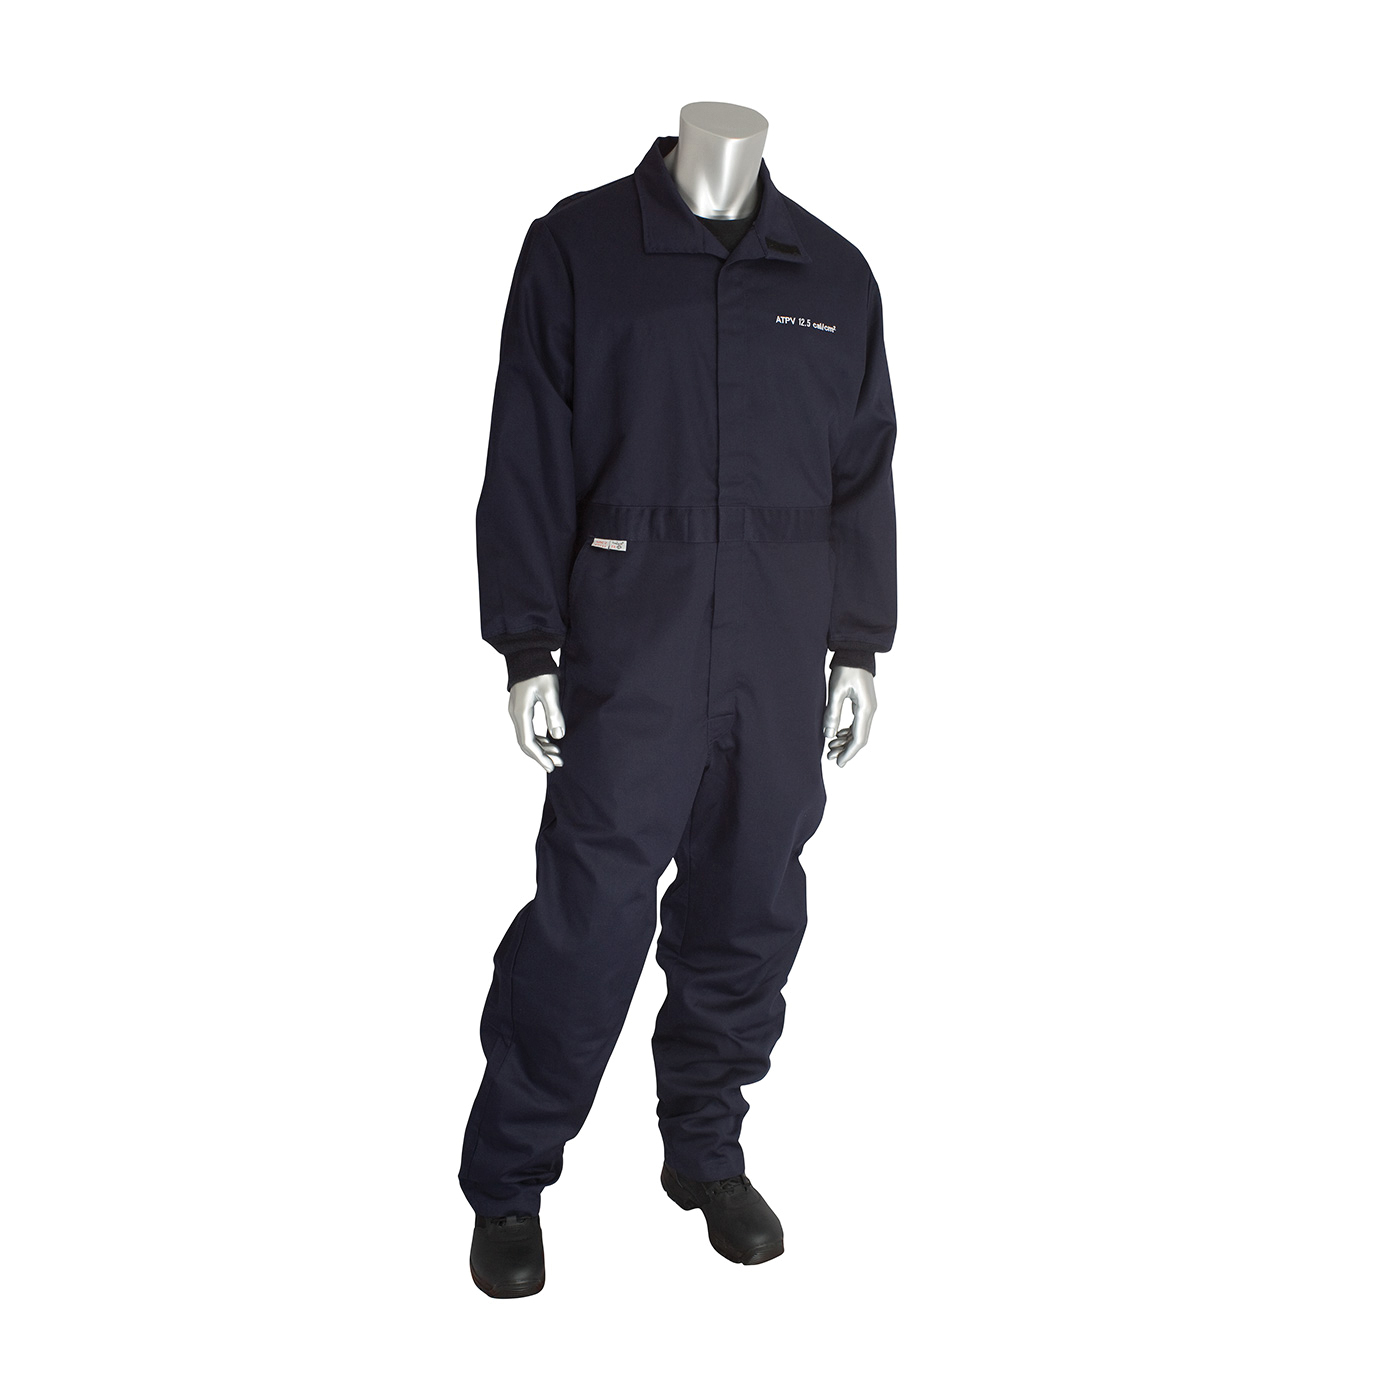 PIP® 9100-2170D/XL Flame Resistant Coverall, XL, Navy, 90% Cotton/10% Nylon/FR Twill Weave, 48 to 50 in Chest, 32 in L Inseam